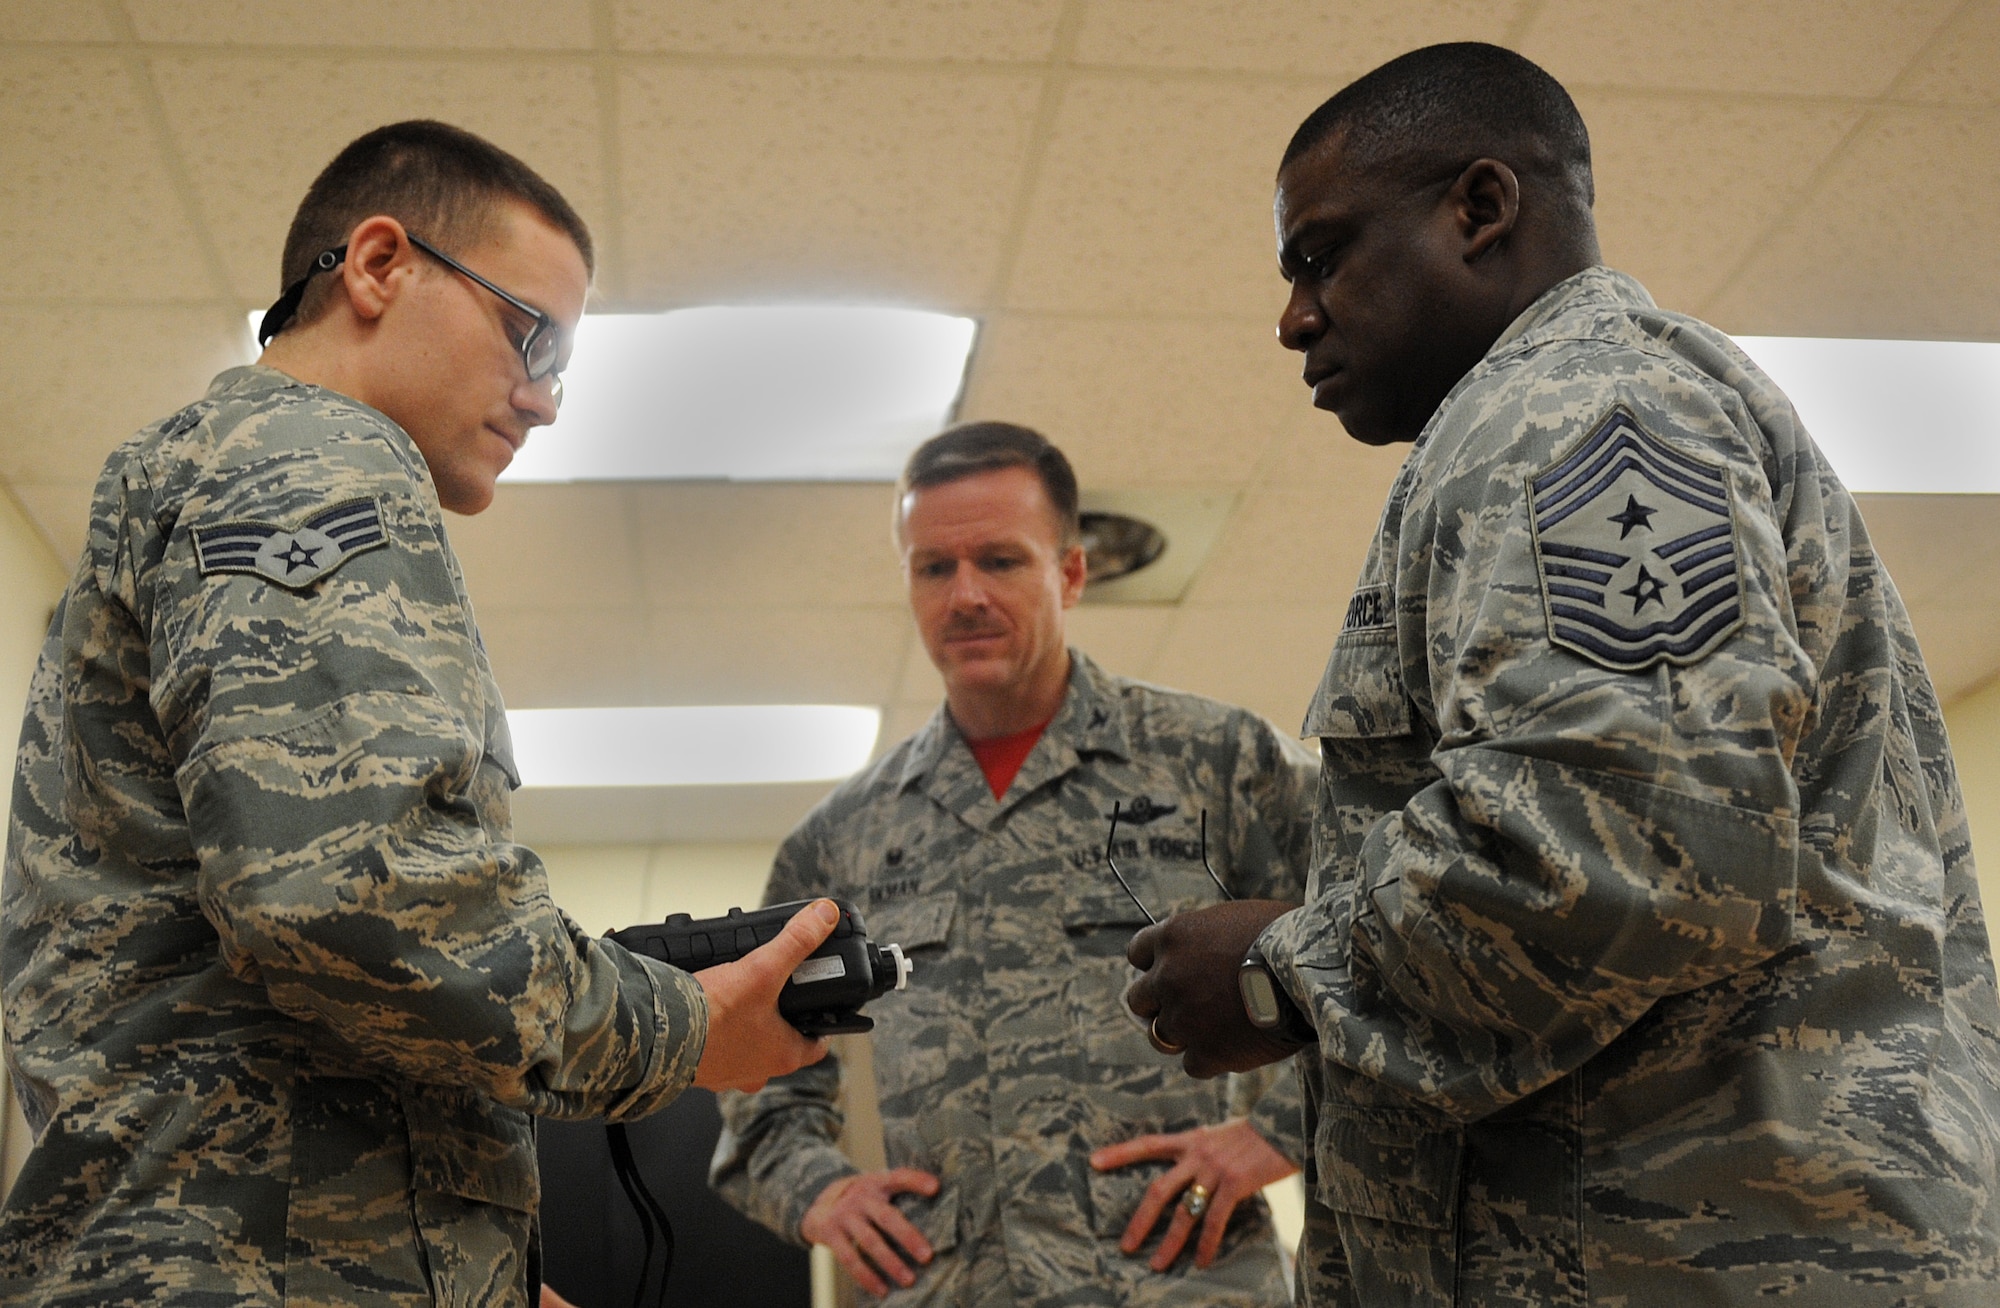 Senior Airman Cody Henning, 8th Civil Engineer Squadron readiness and emergency management journeyman, shows Col. Ken “Wolf” Ekman, 8th Fighter Wing commander, and Chief Master Sgt. Lee “Wolf Chief” Barr, 8th Fighter Wing command chief, how to check chemical threats in the air using hazardous material equipment at Kunsan Air Base, Republic of Korea, March 13, 2015. Henning showed Wolf and Wolf Chief how he contributes to the Wolf Pack mission. (U.S. Air Force photo by Senior Airman Divine Cox/Released) 